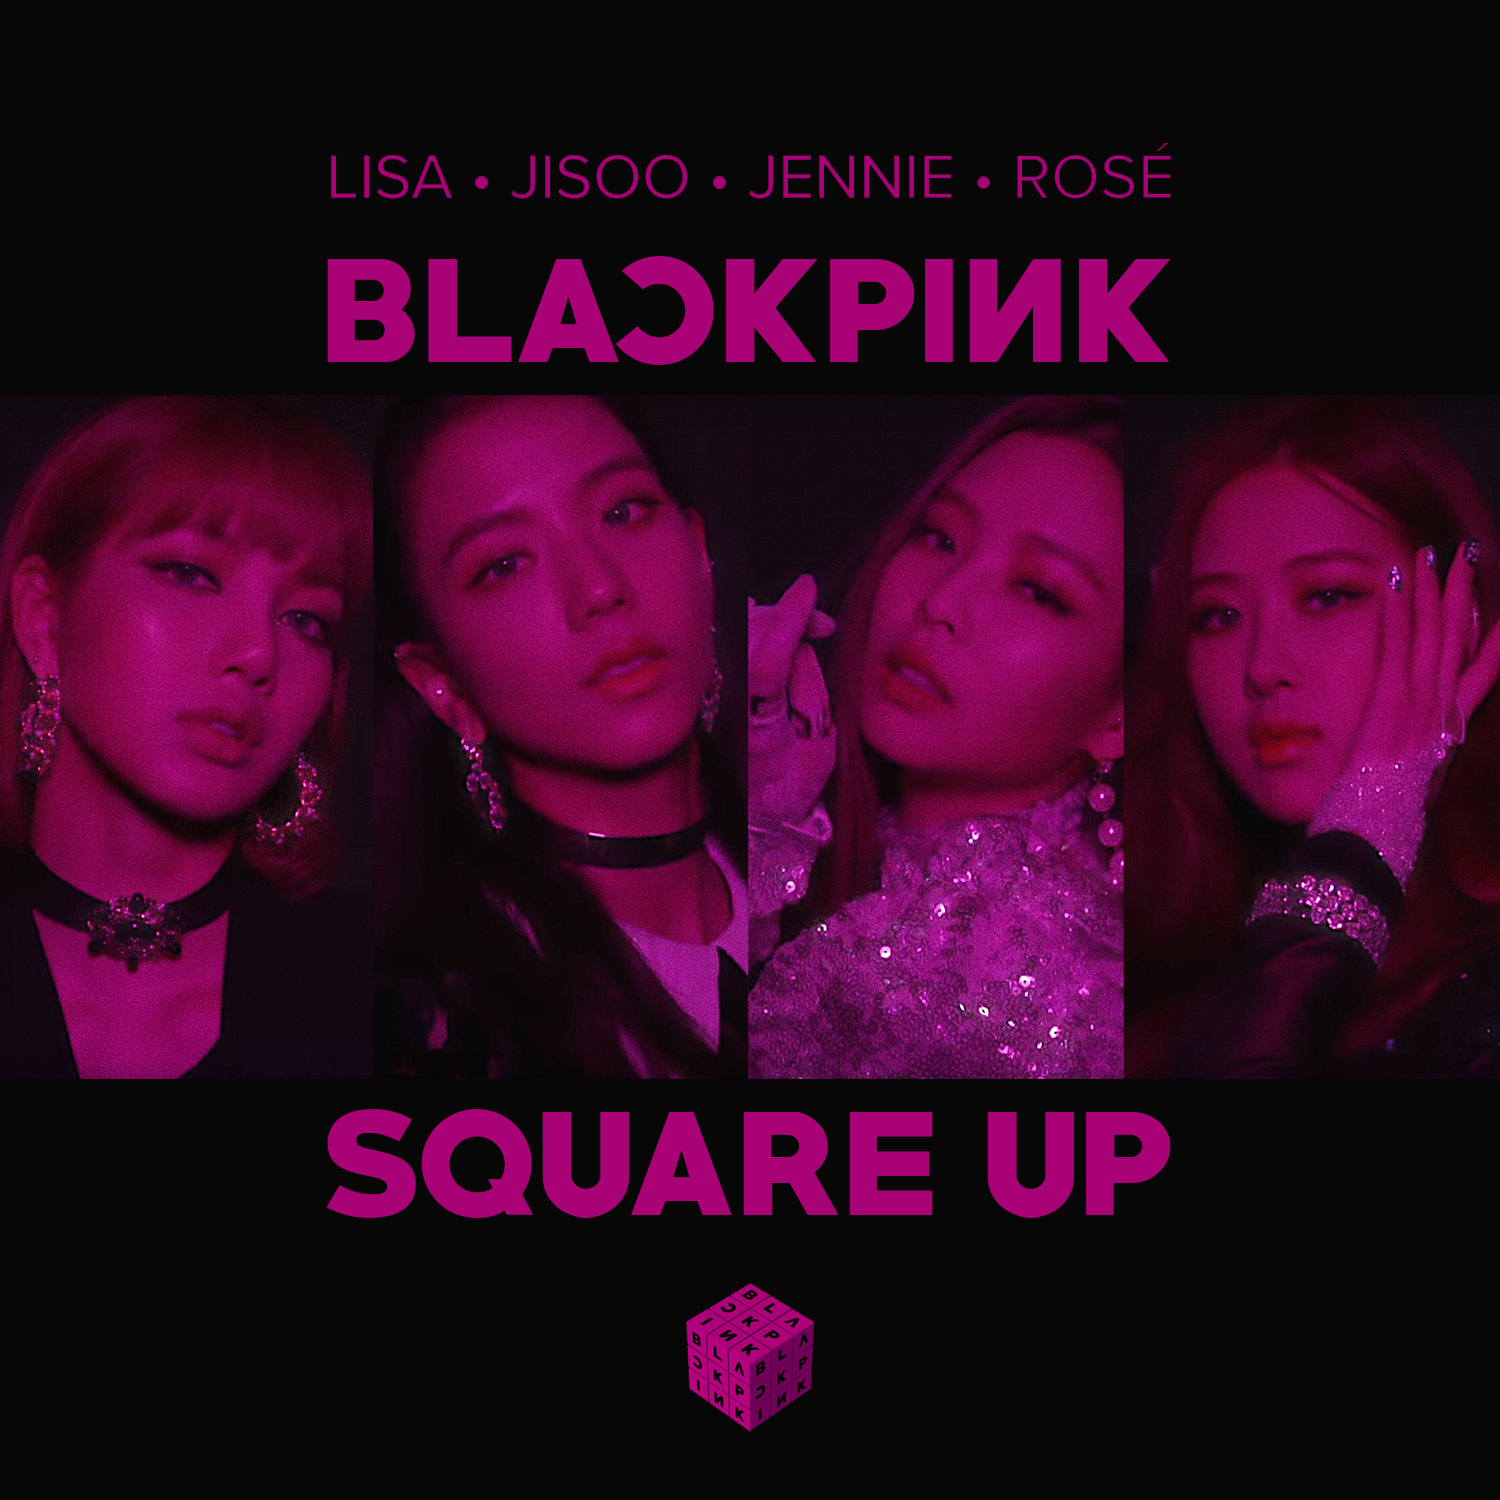 Blackpink Square Up Fanmade Album Cover [MG VER.] by sooyng on DeviantArt